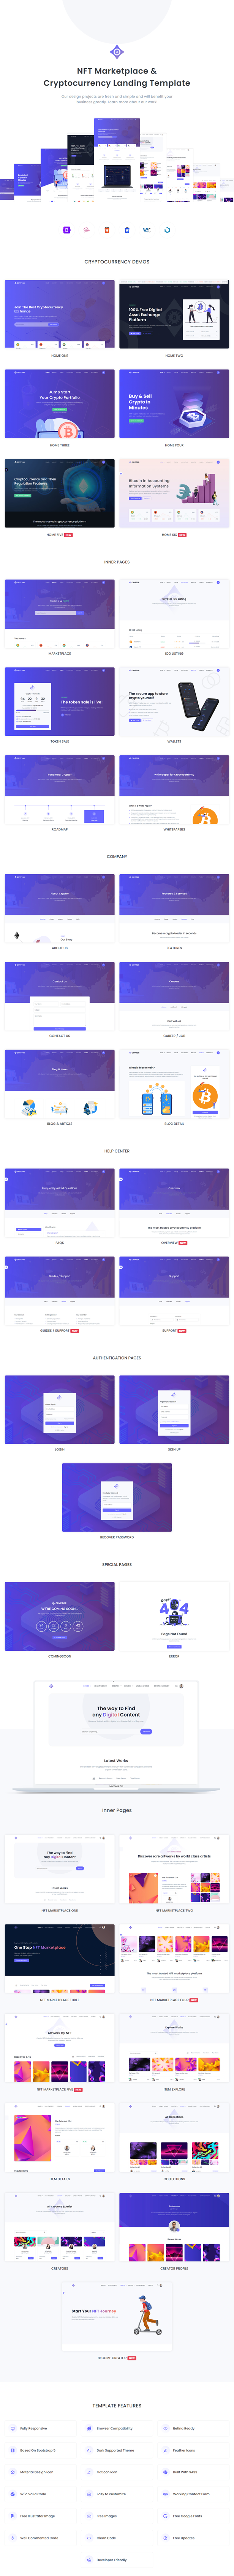 Cryptor - NFT Marketplace & Cryptocurrency Bootstrap 5 Landing Template - 2